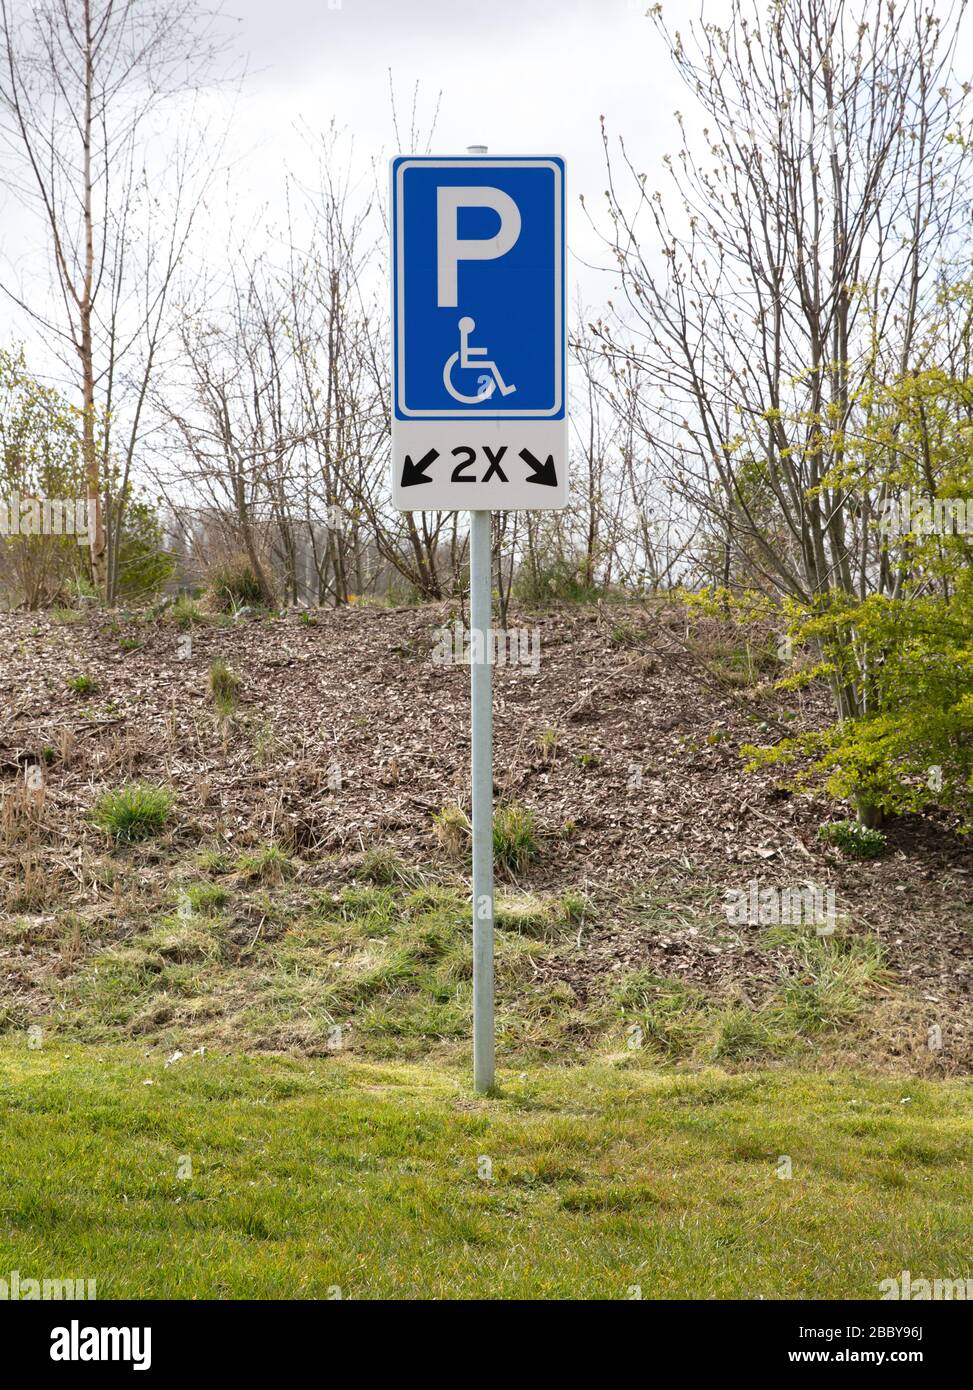 Disabled parking bay sign standing on the grass Stock Photo